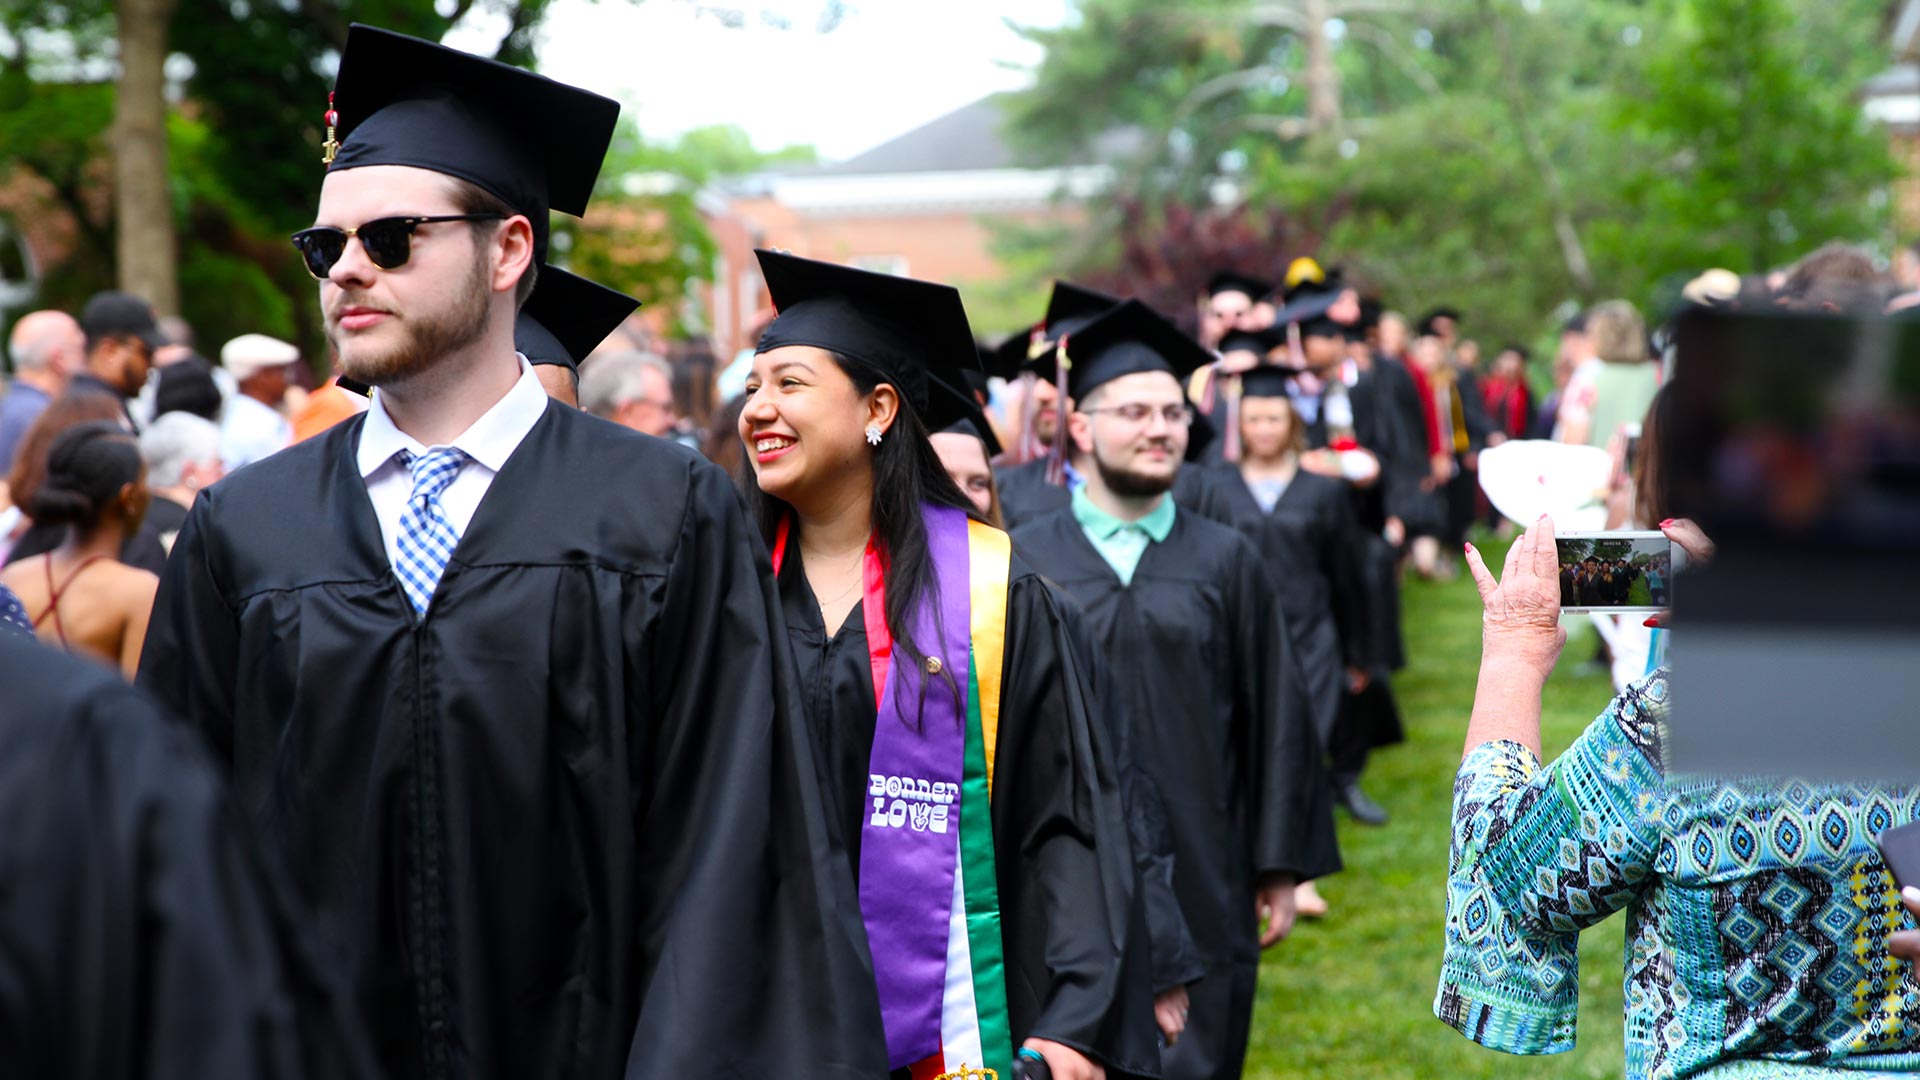 Graduating students walk into Commencement.